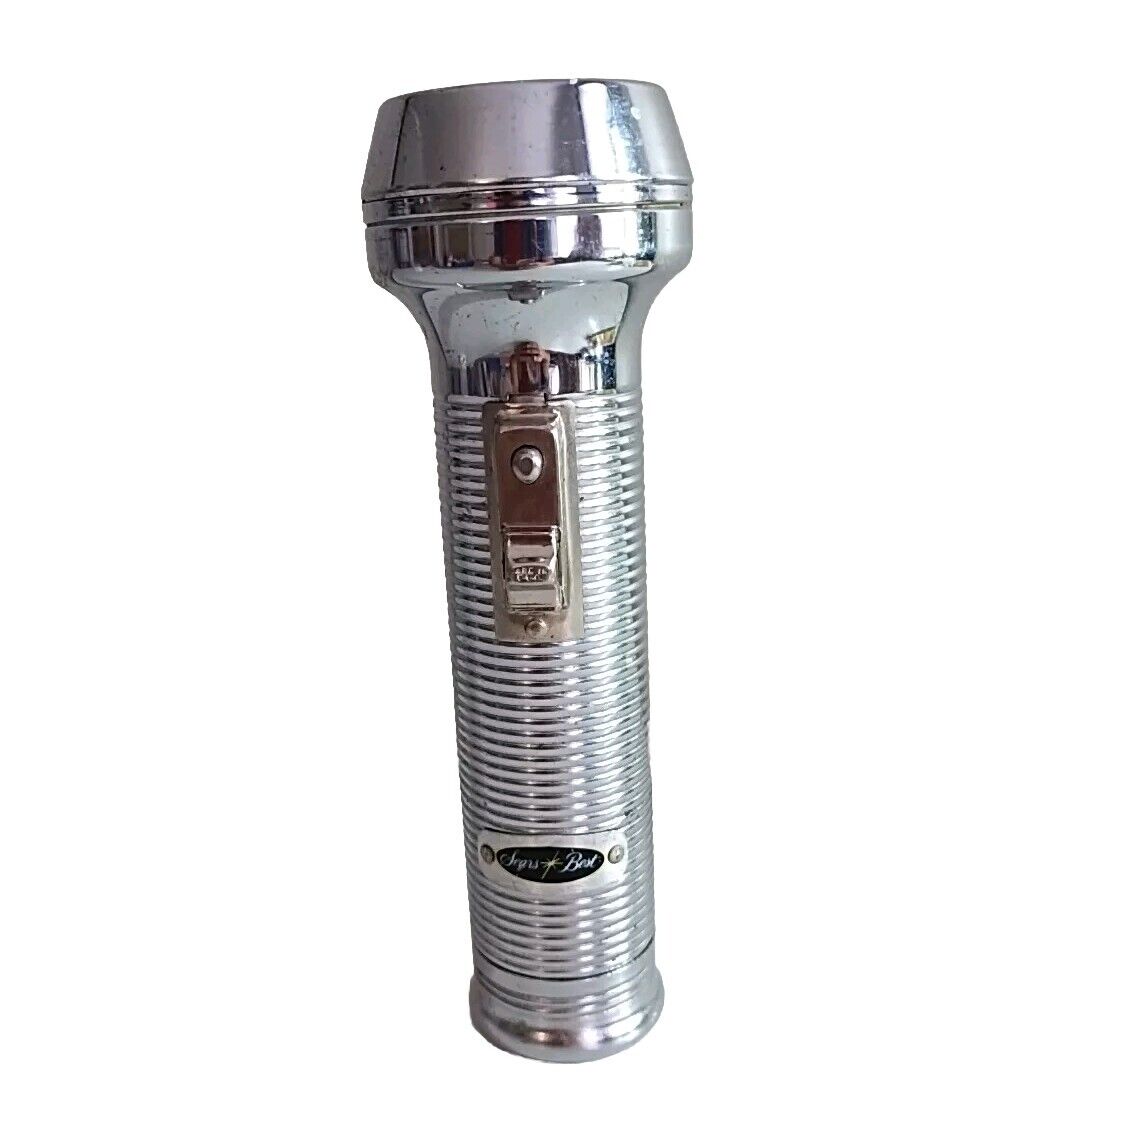 Vintage Sears Best Chrome Metal Flashlight - Made in U.S.A.